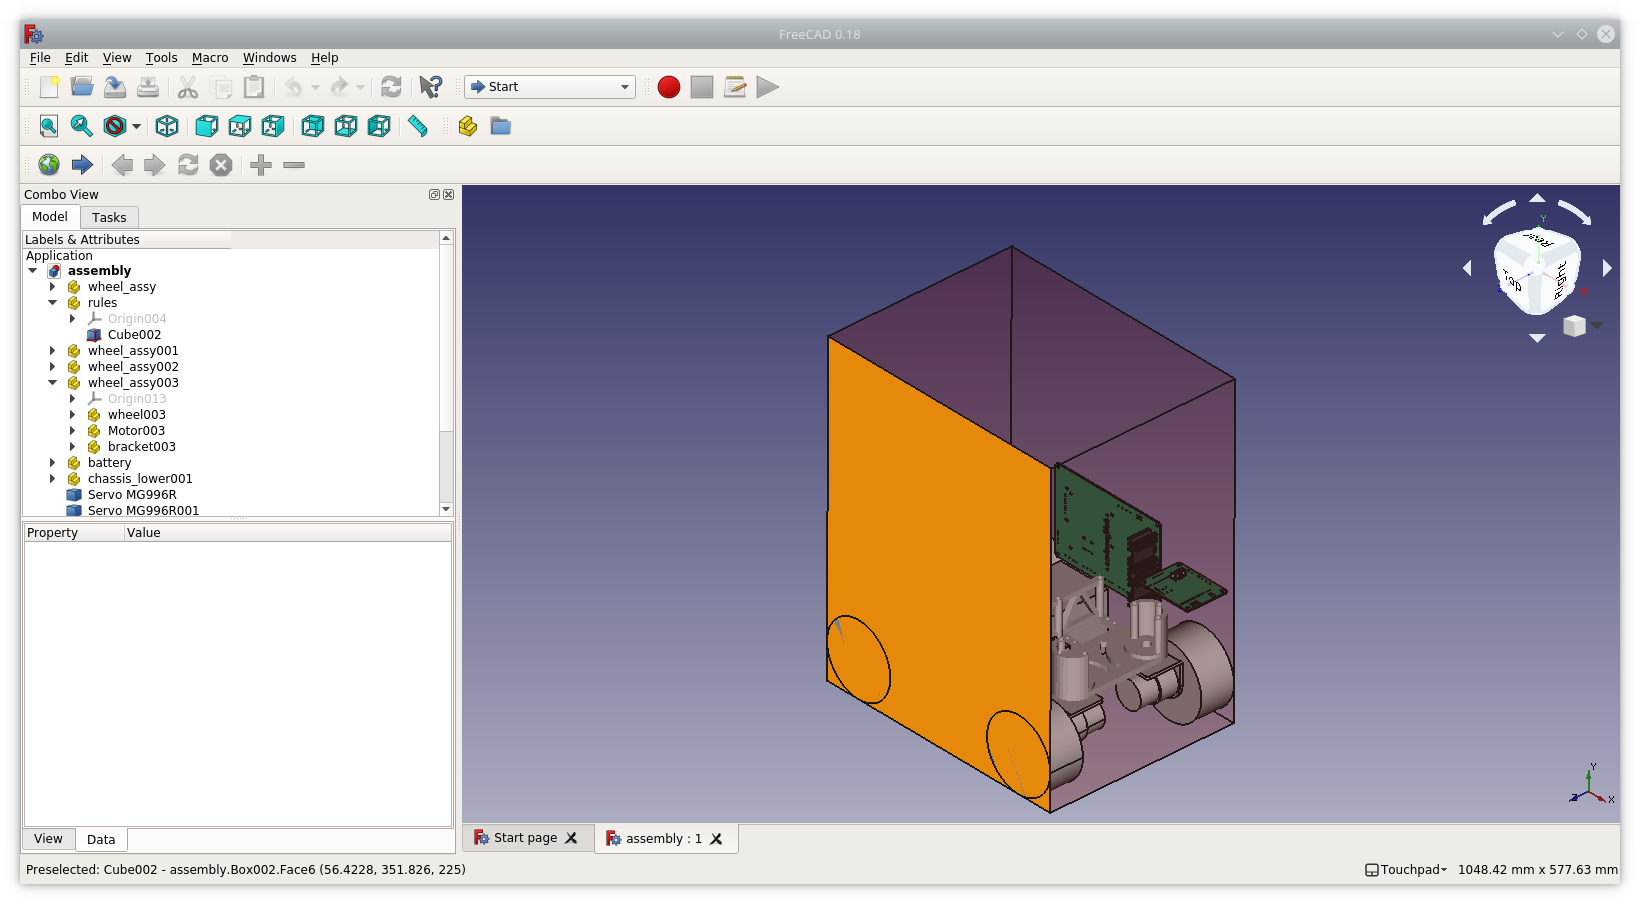 The robot assembly modelled in the open source 3D cad program FreeCAD.